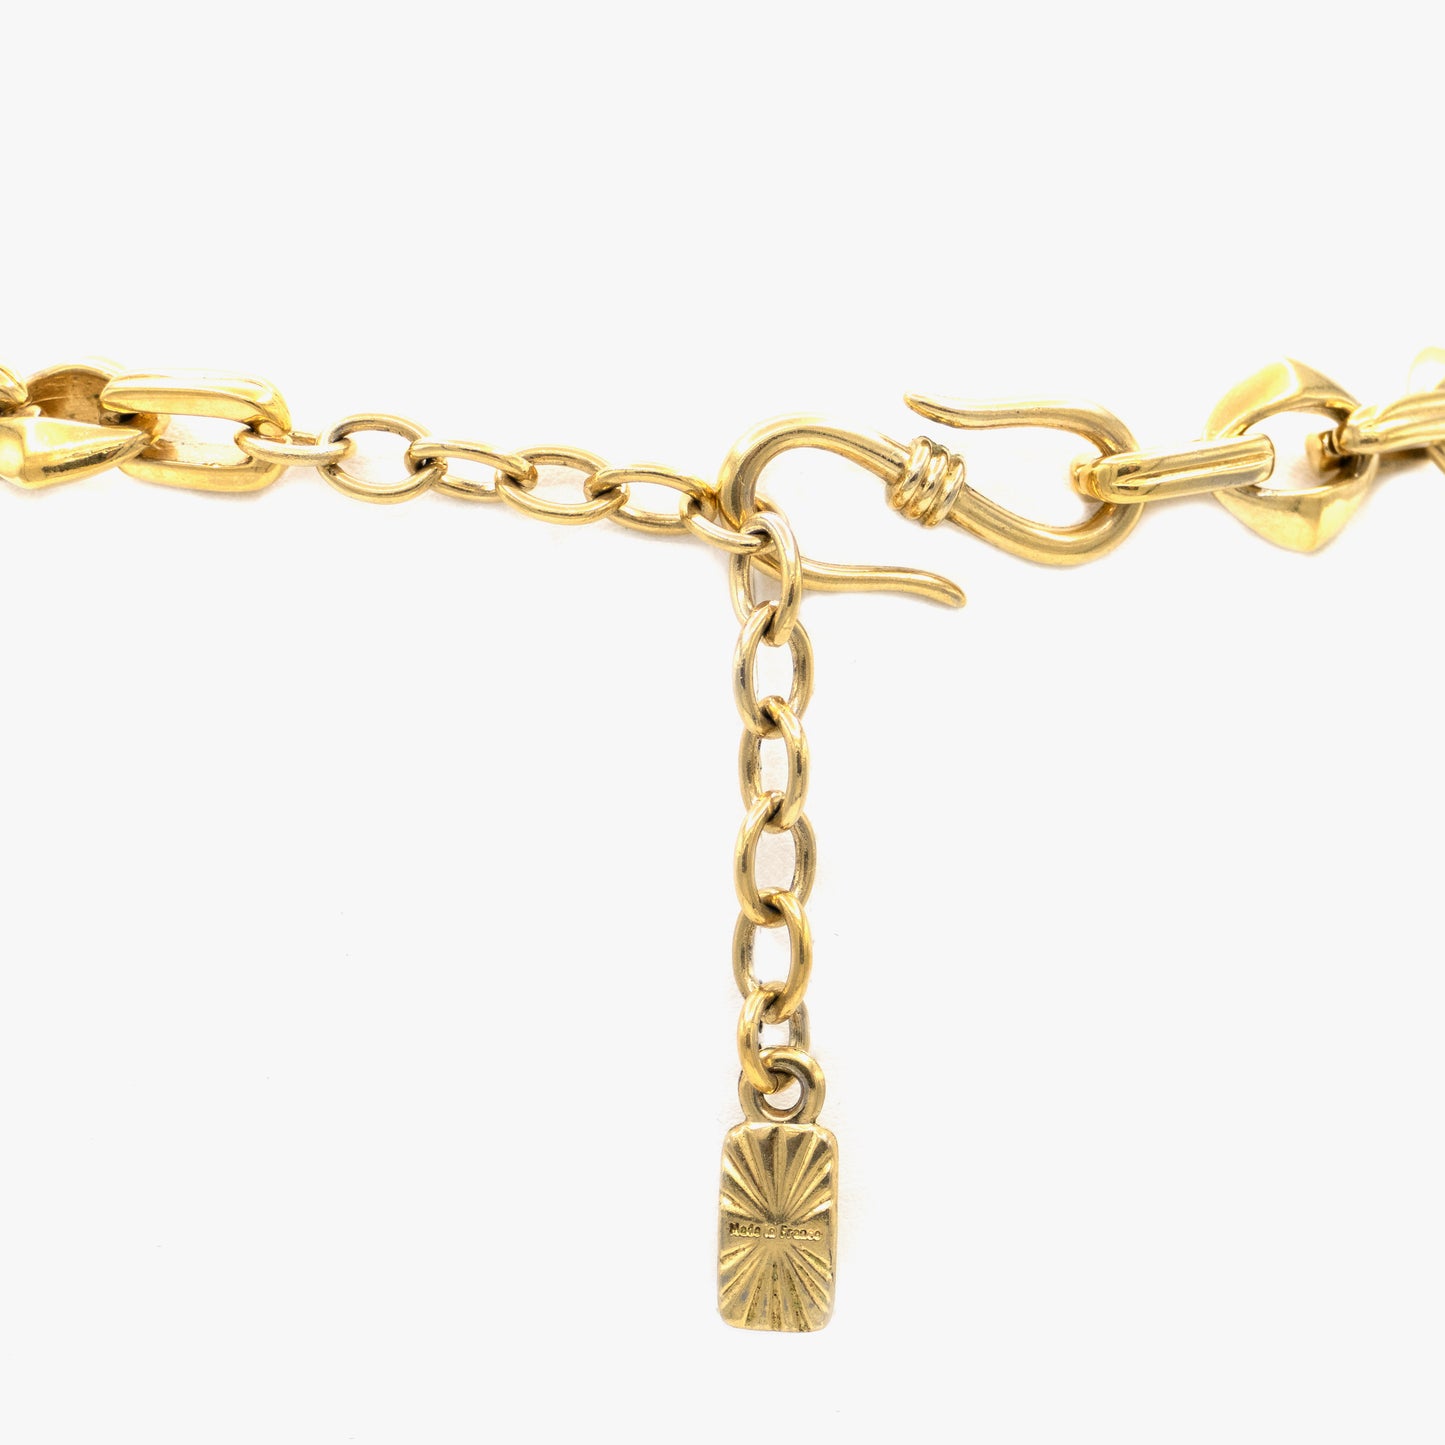 hook of YSL necklace